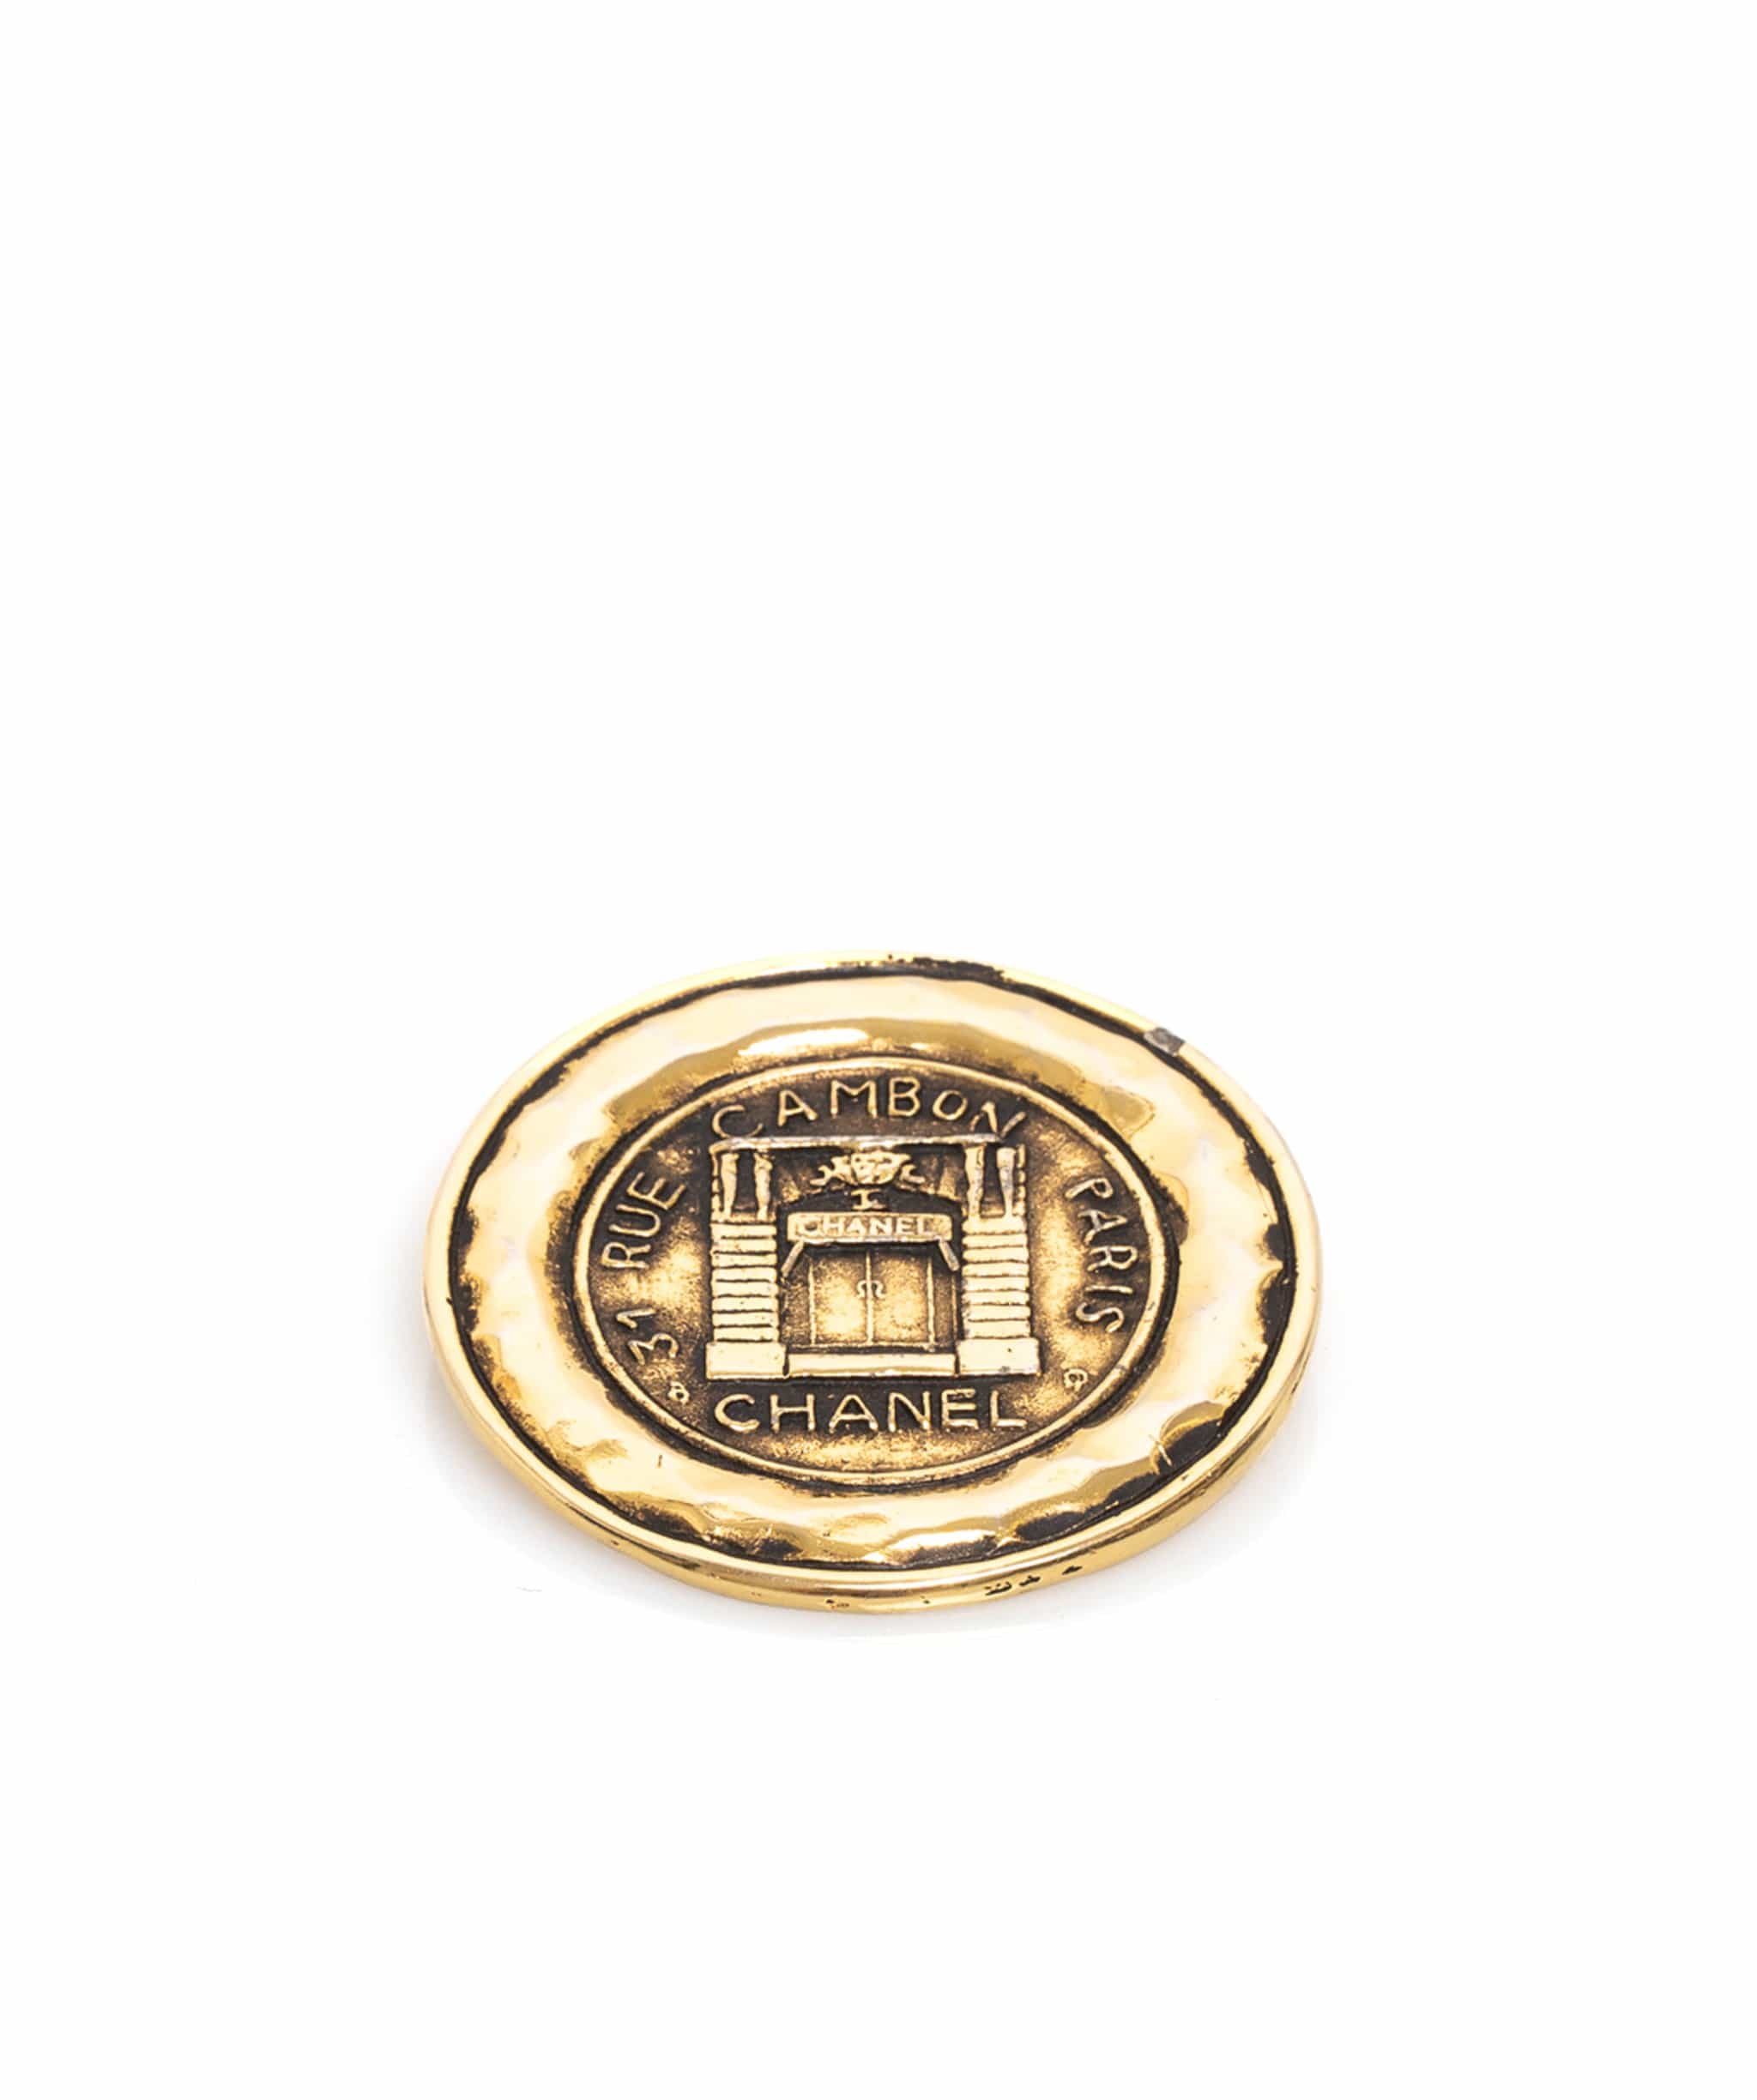 Chanel Chanel Vintage 31 Rue Cambon Round Brooch - AWL1608